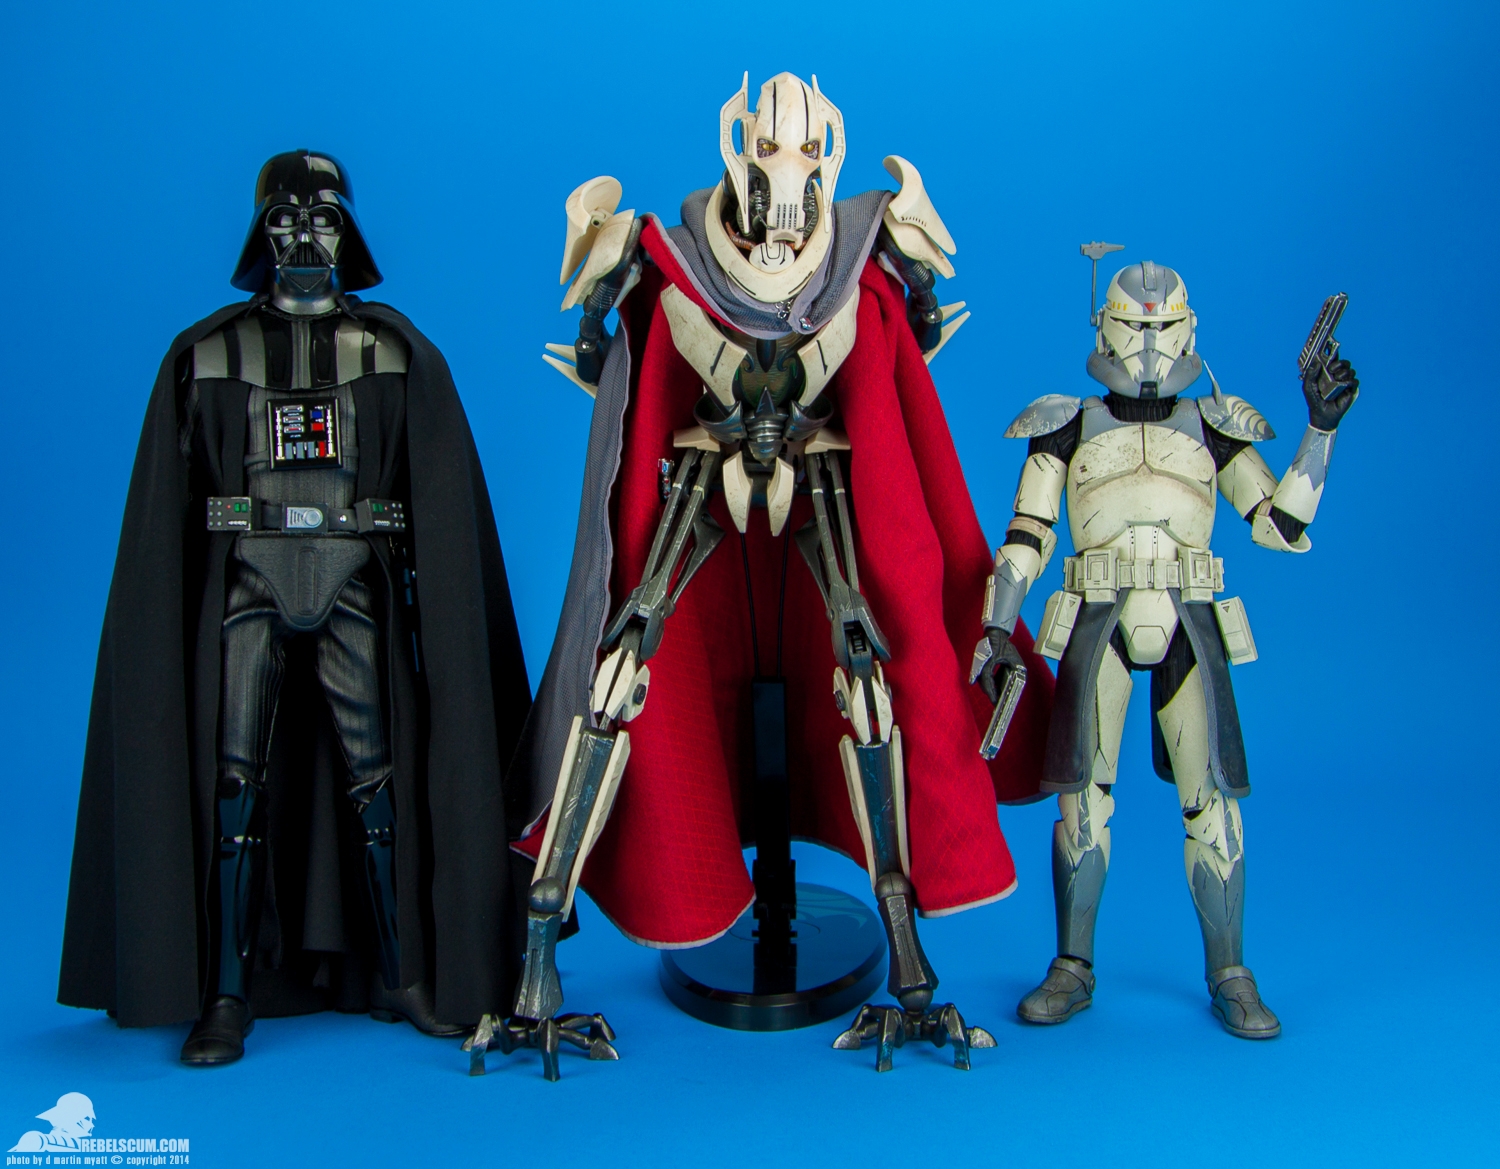 General-Grievous-Sixth-Scale-Figure-Sideshow-Collectibles-025.jpg